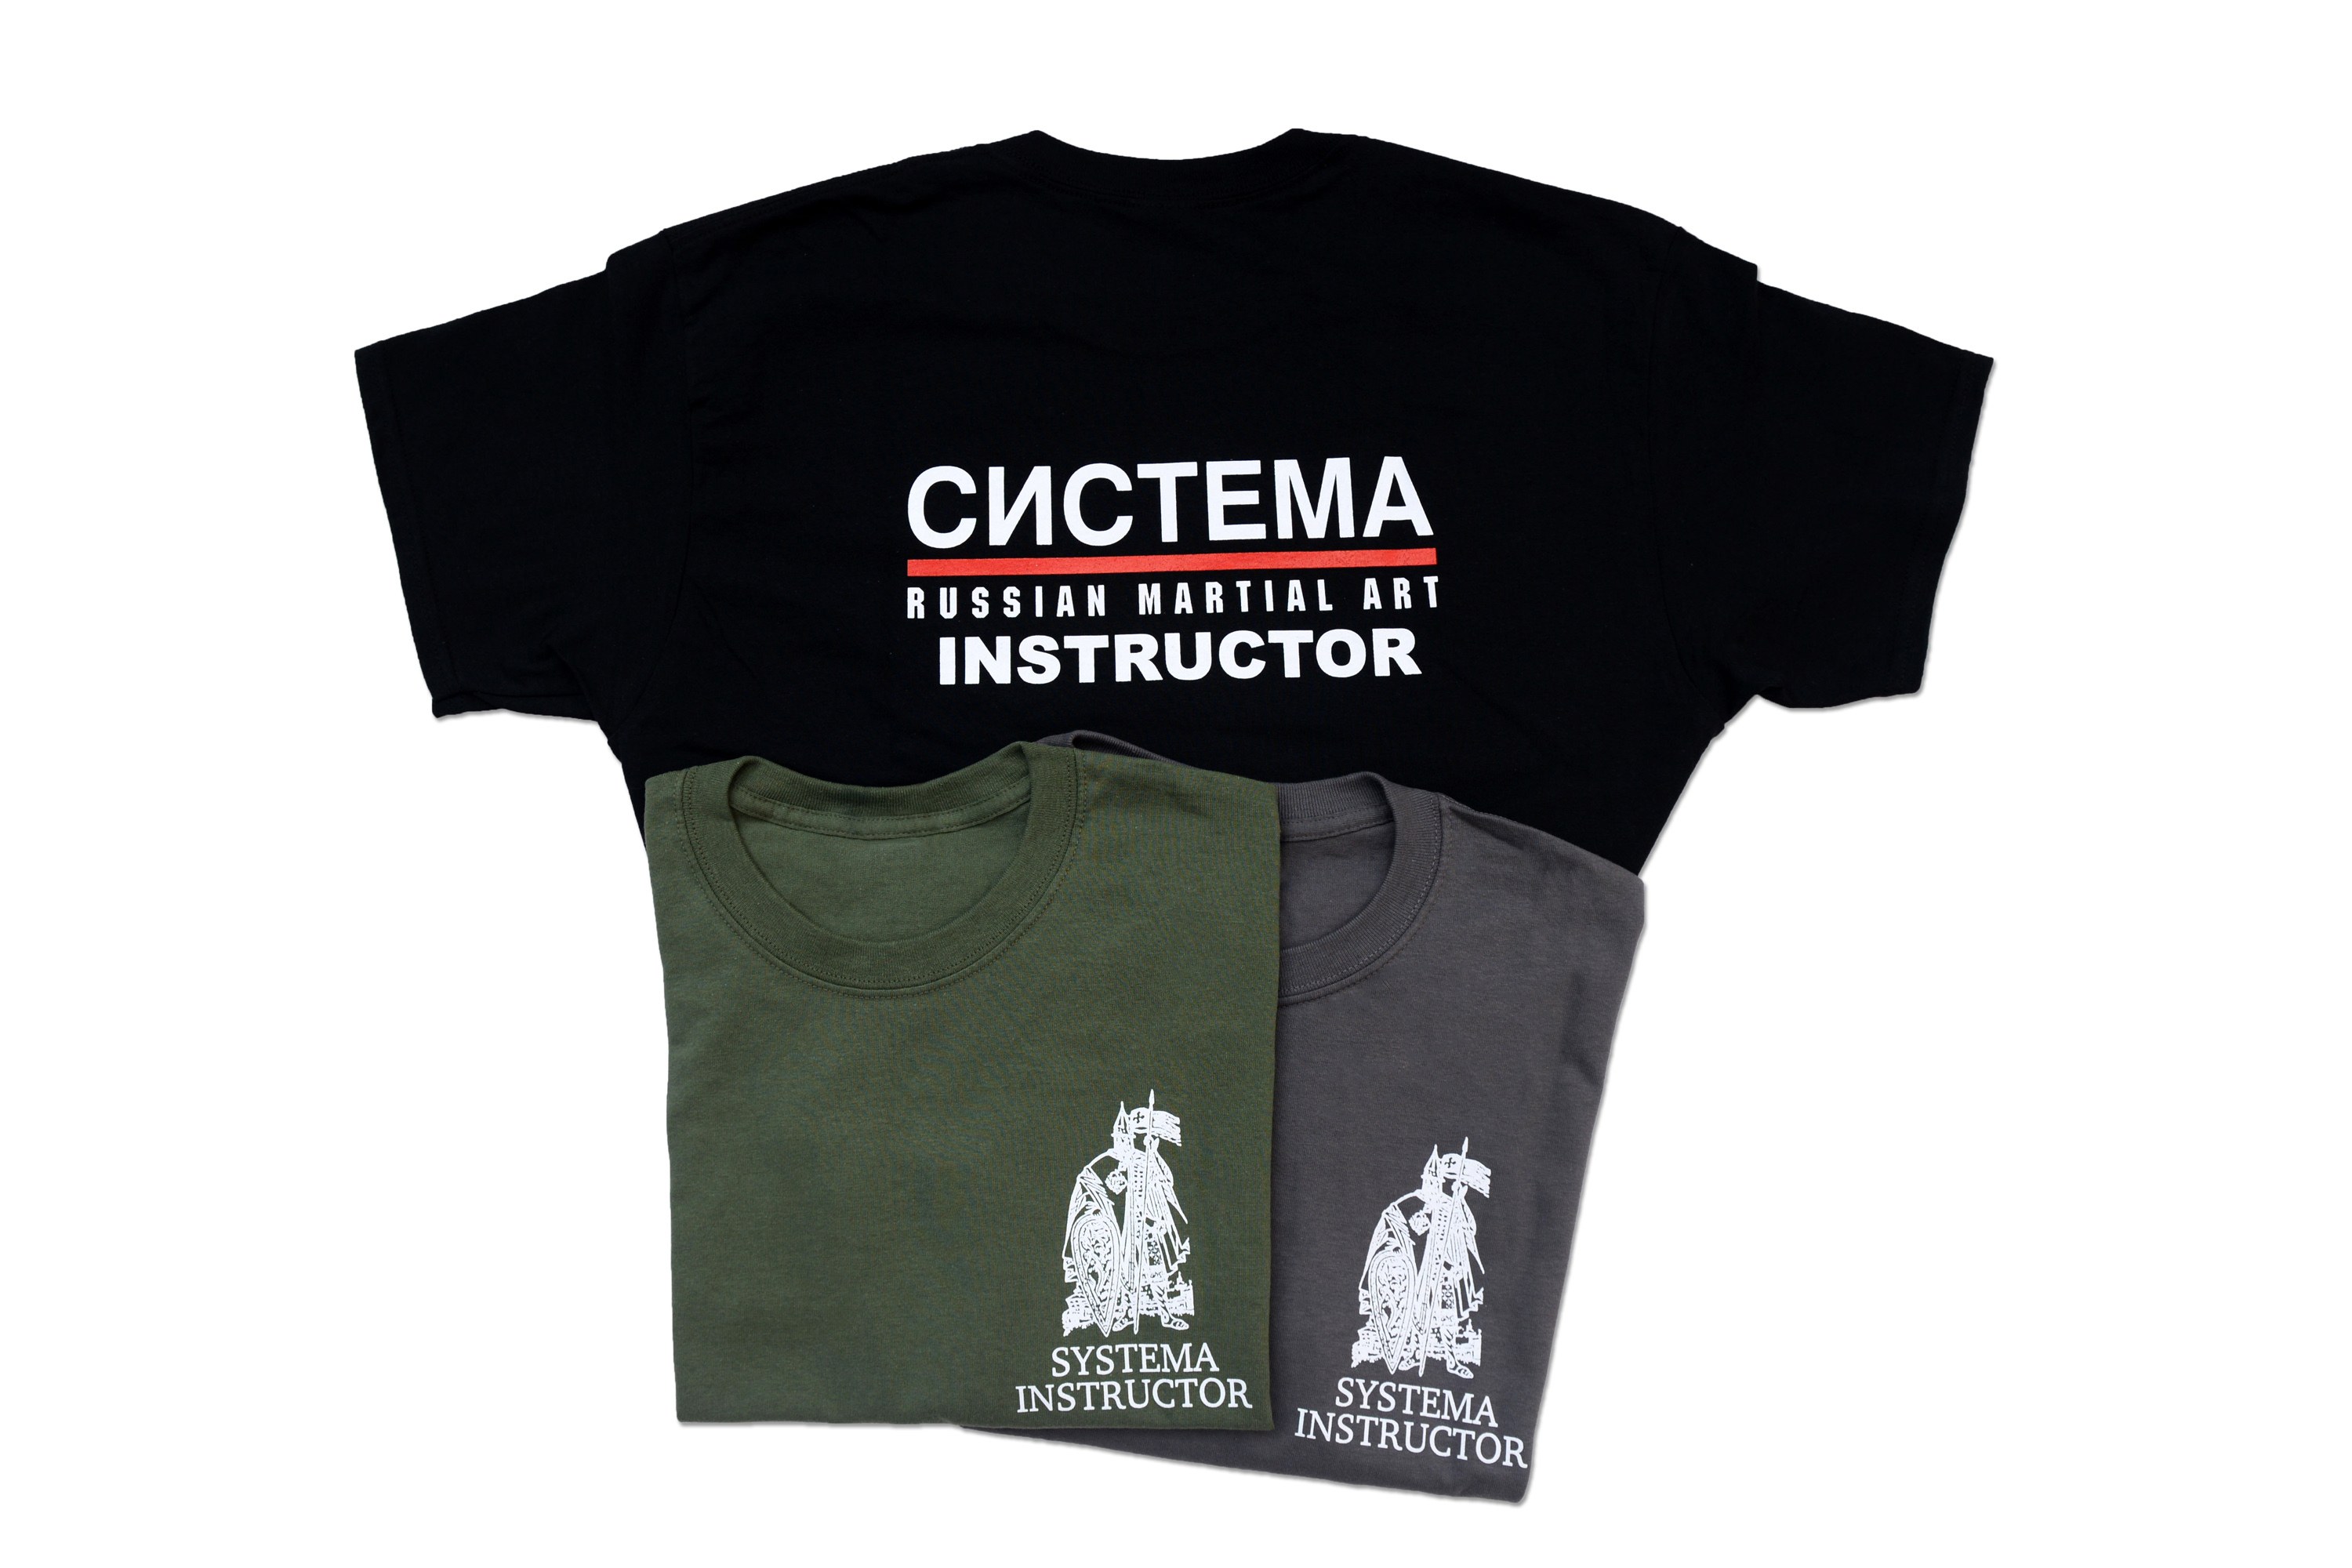 The Official Systema Instructor T-Shirt